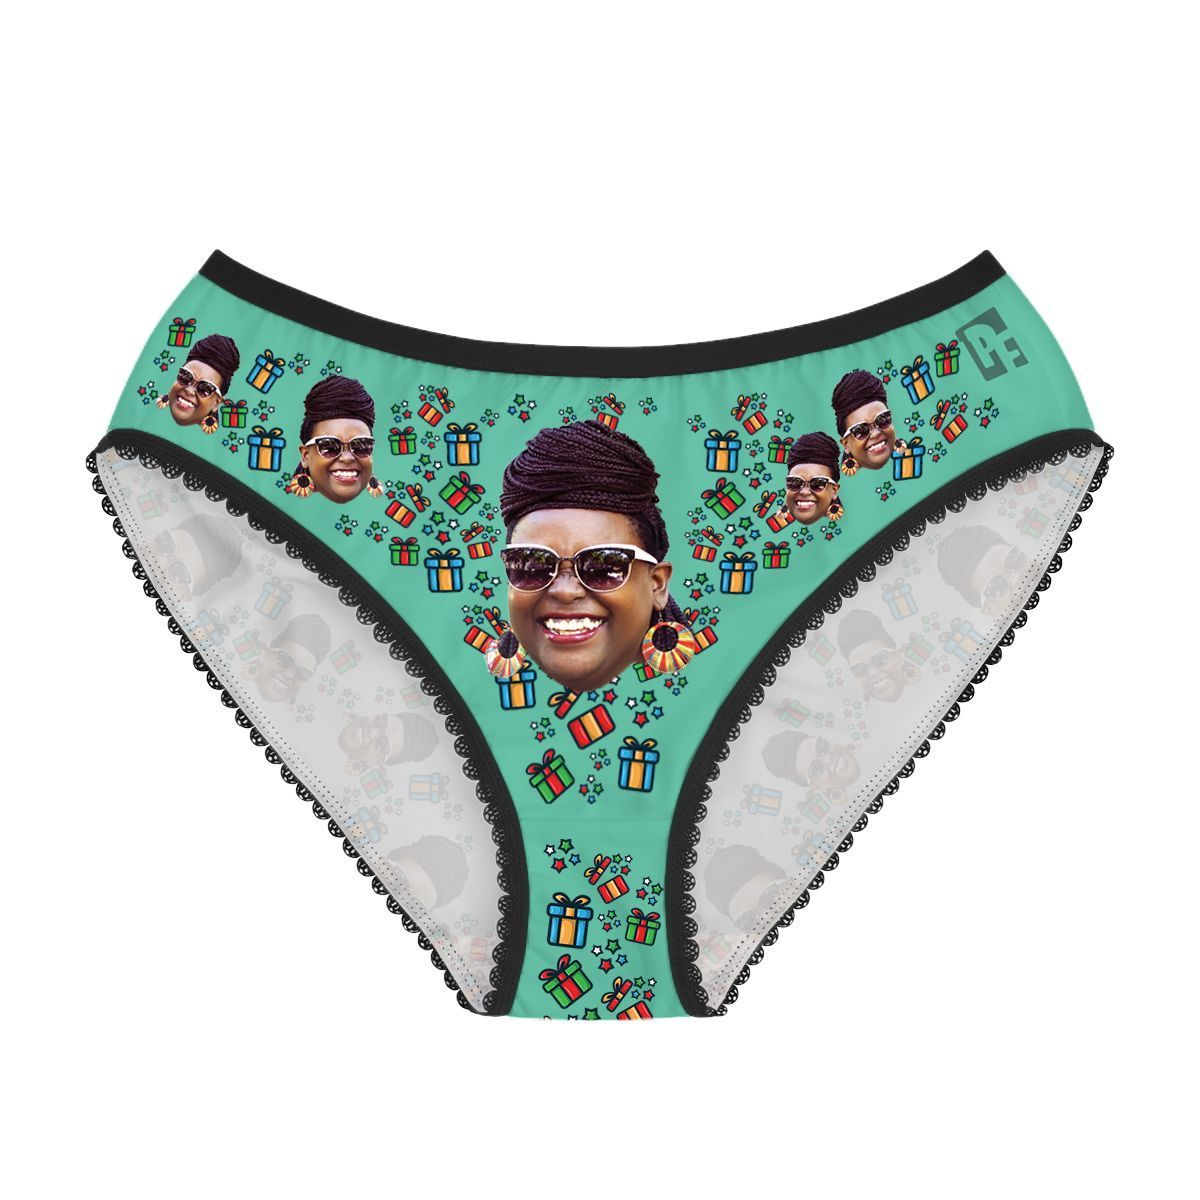 Mint Gift Box women's underwear briefs personalized with photo printed on them